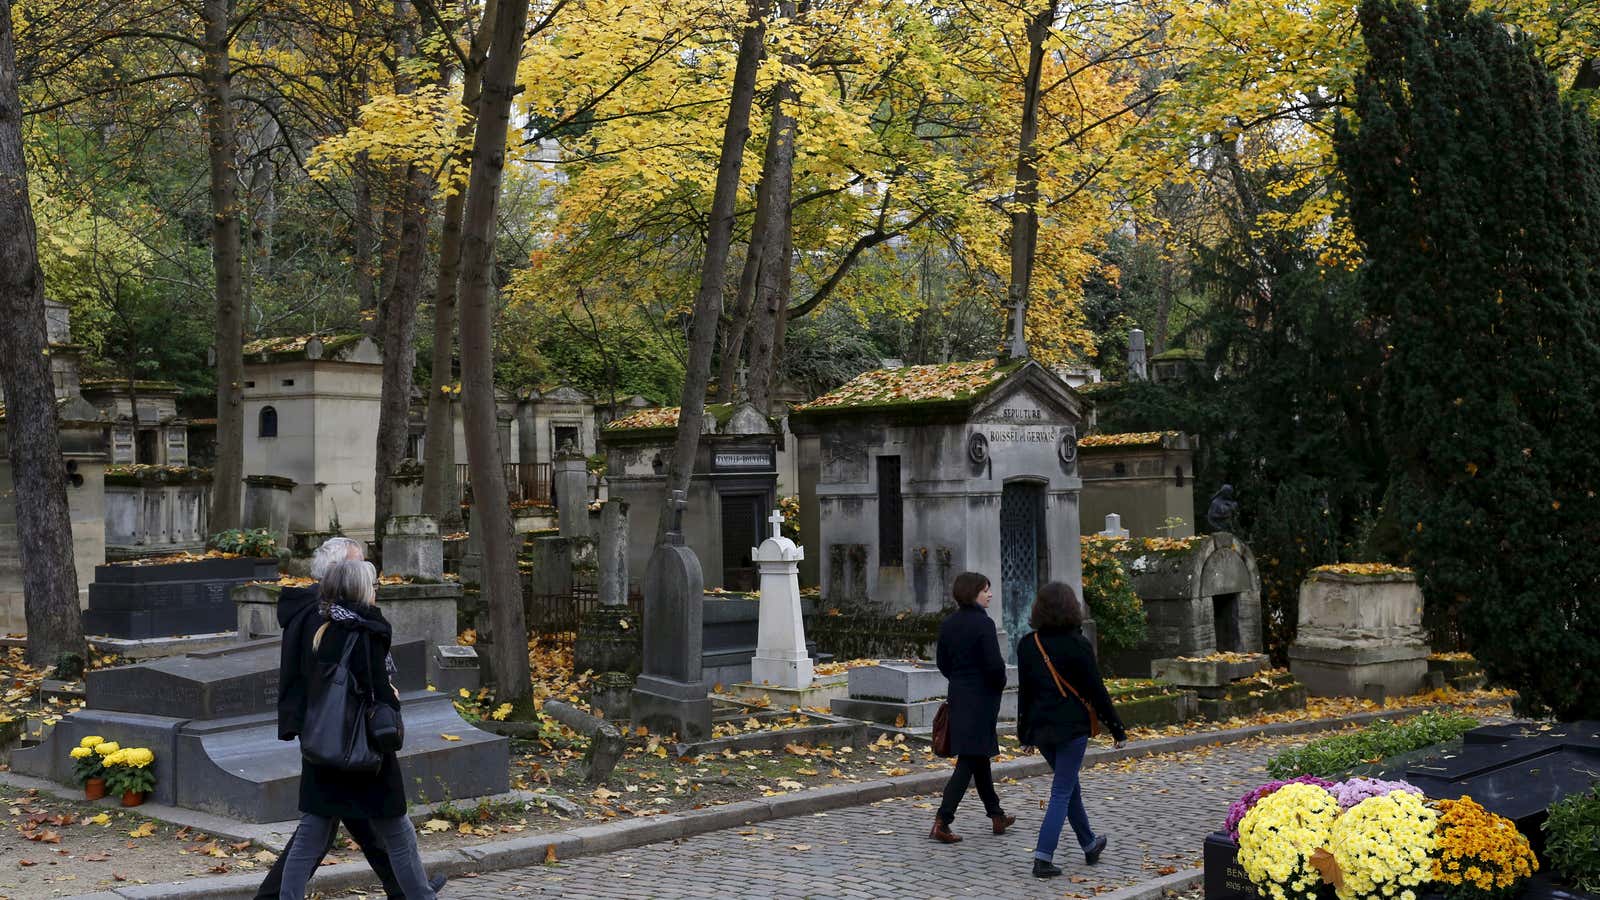 Startups are challenging traditions surrounding death in France.